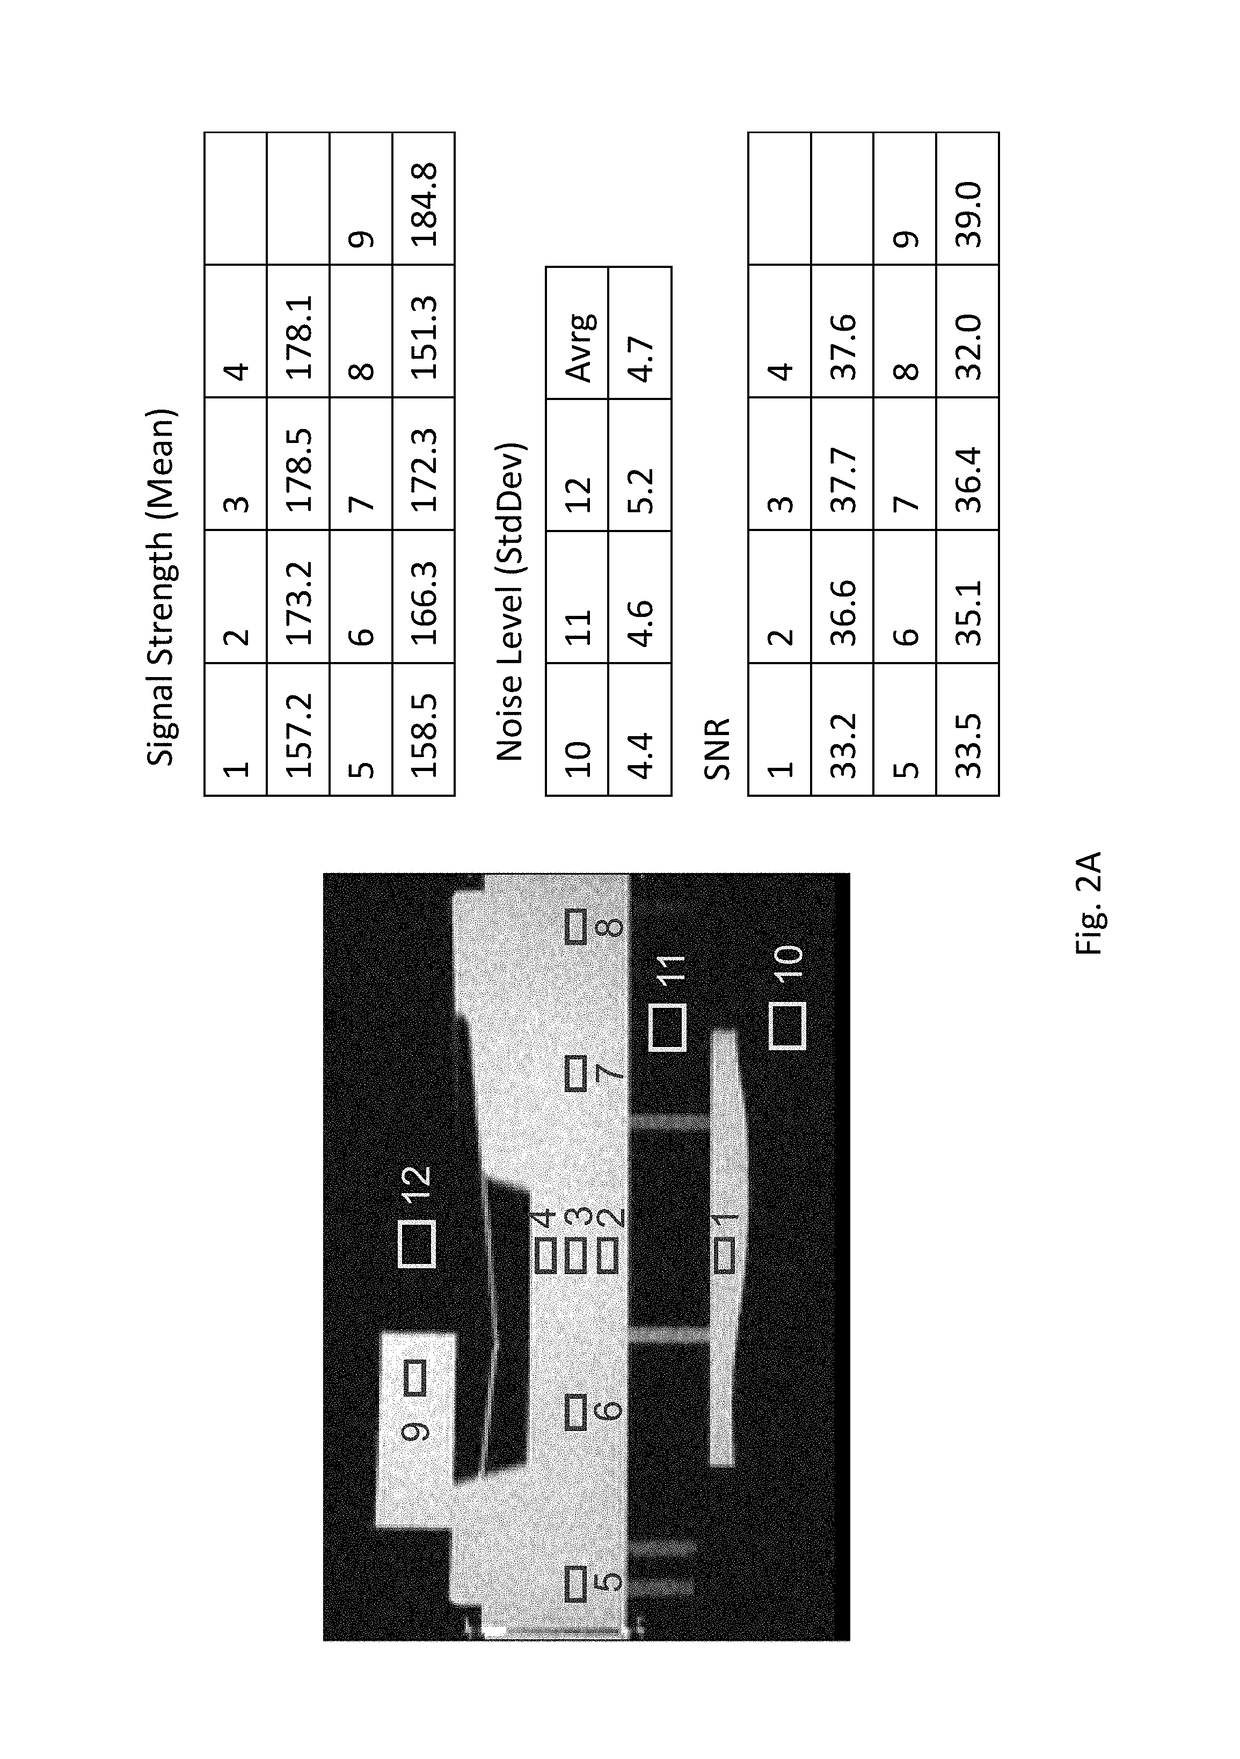 Apparatus for Improving Magnetic Resonance Imaging